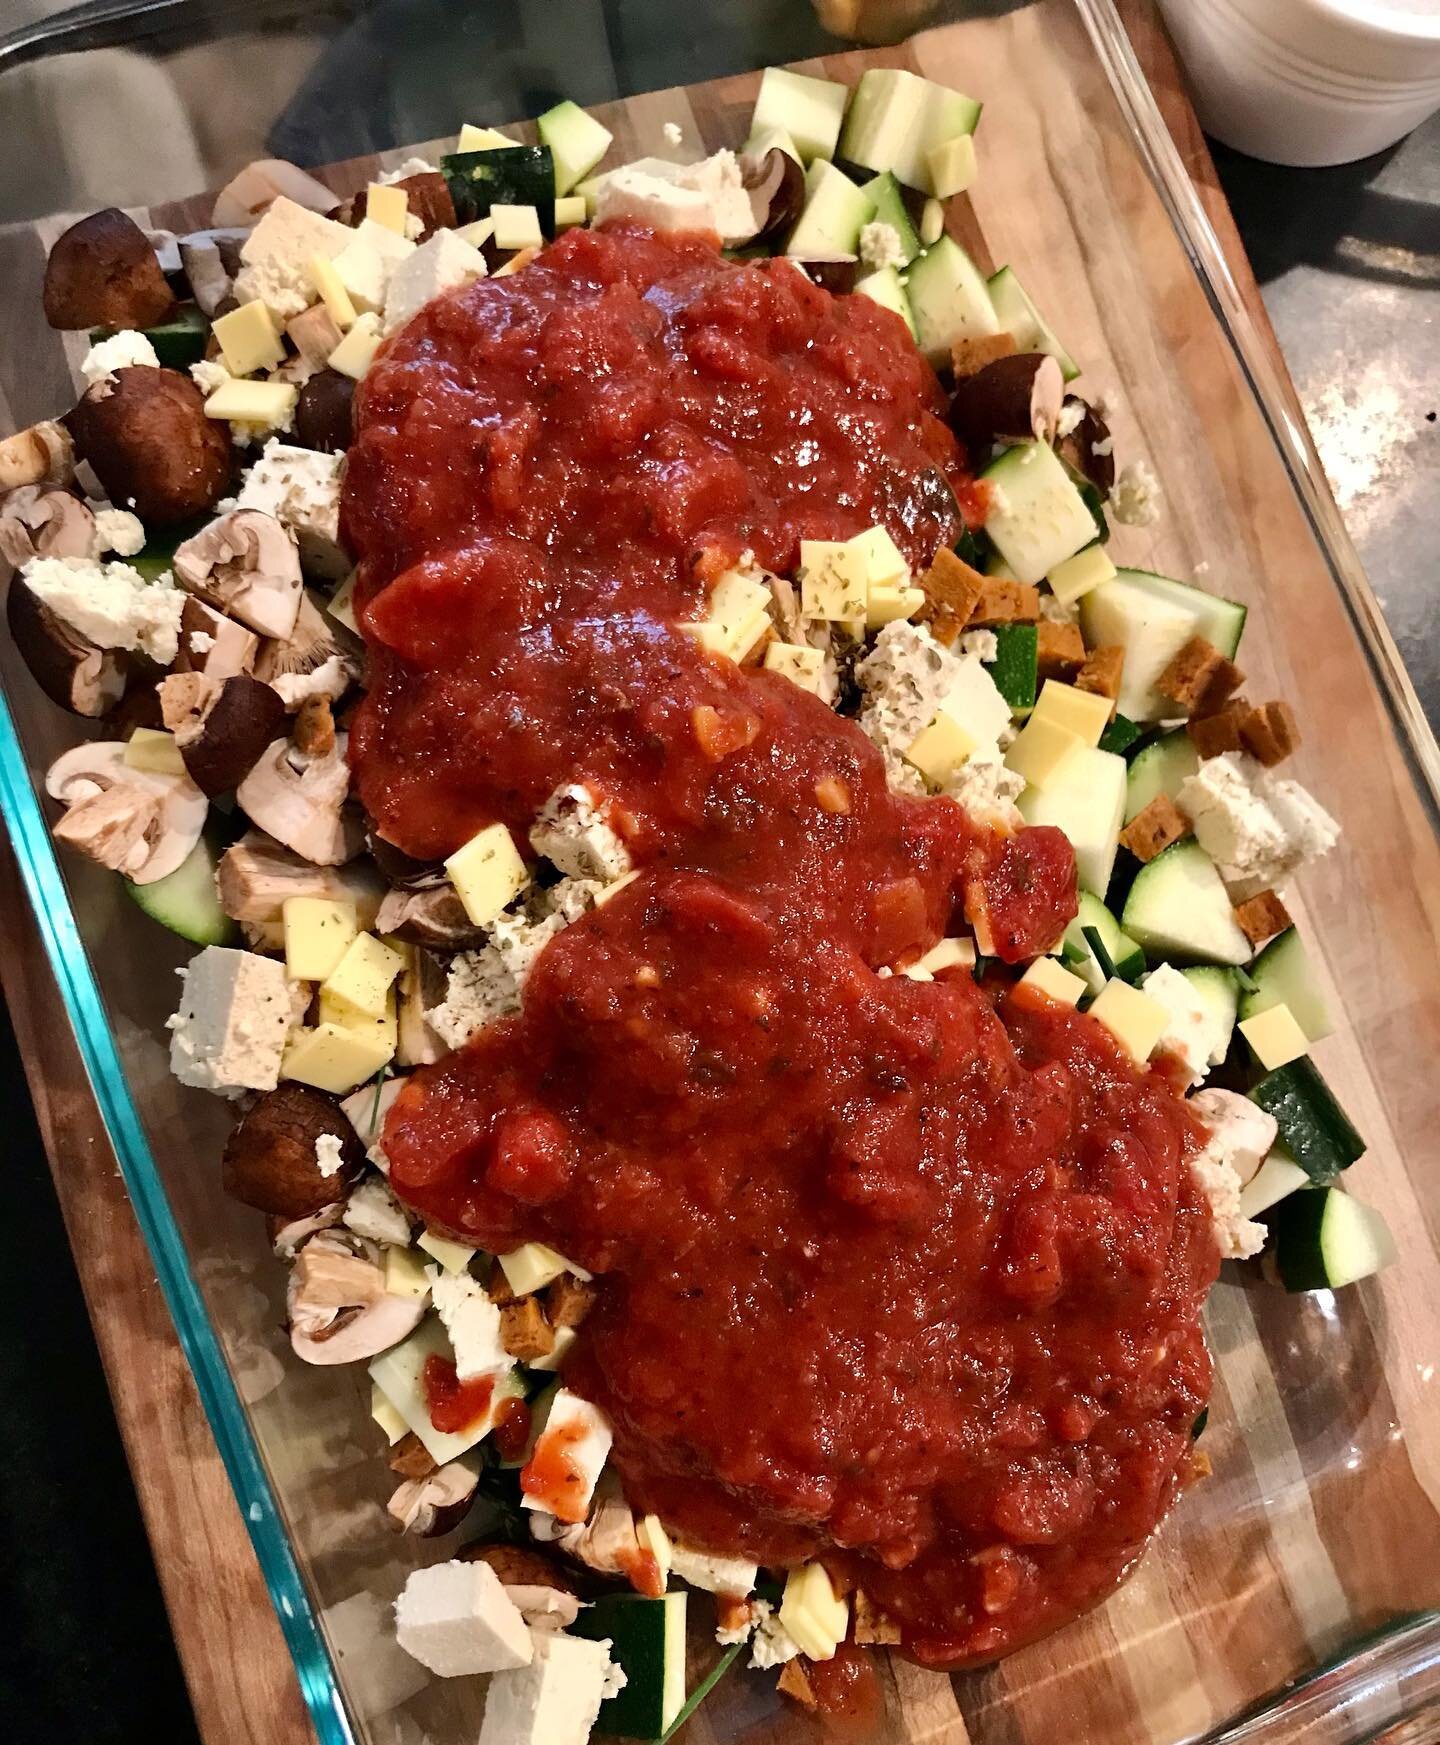 Let me tell you about this lazy un-sagne I made with our zucchini and herbs, @primordiafarm mushrooms, @butterheadkitchen pepperoni, crumbled tofu, sauce and some other odds and ends 🤤